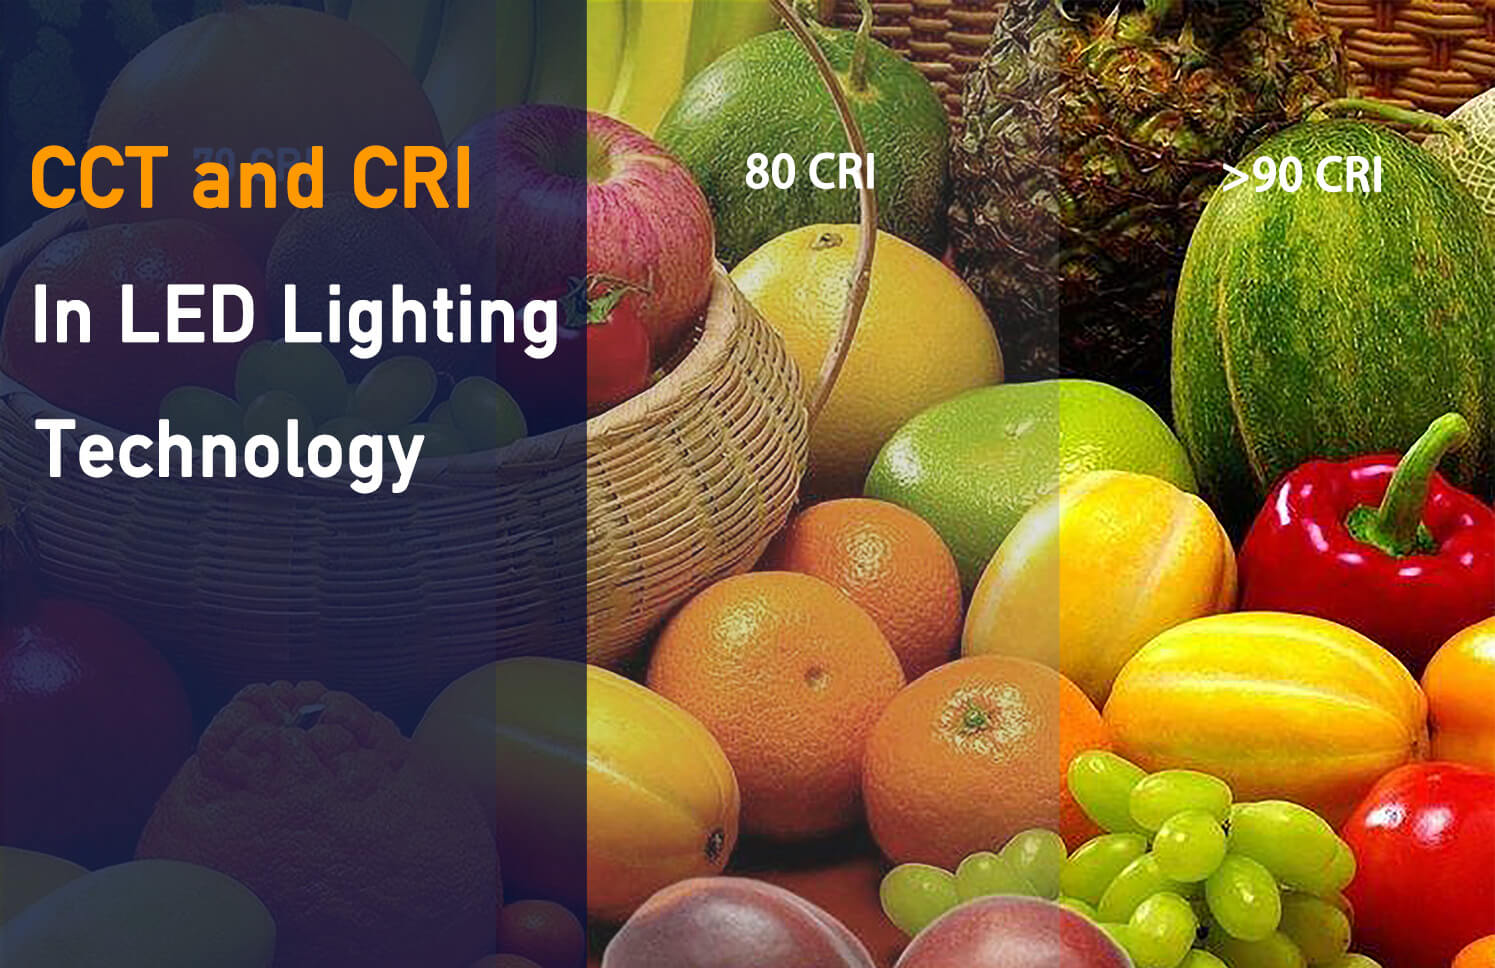 CCT and CRI in LED Lighting Technology